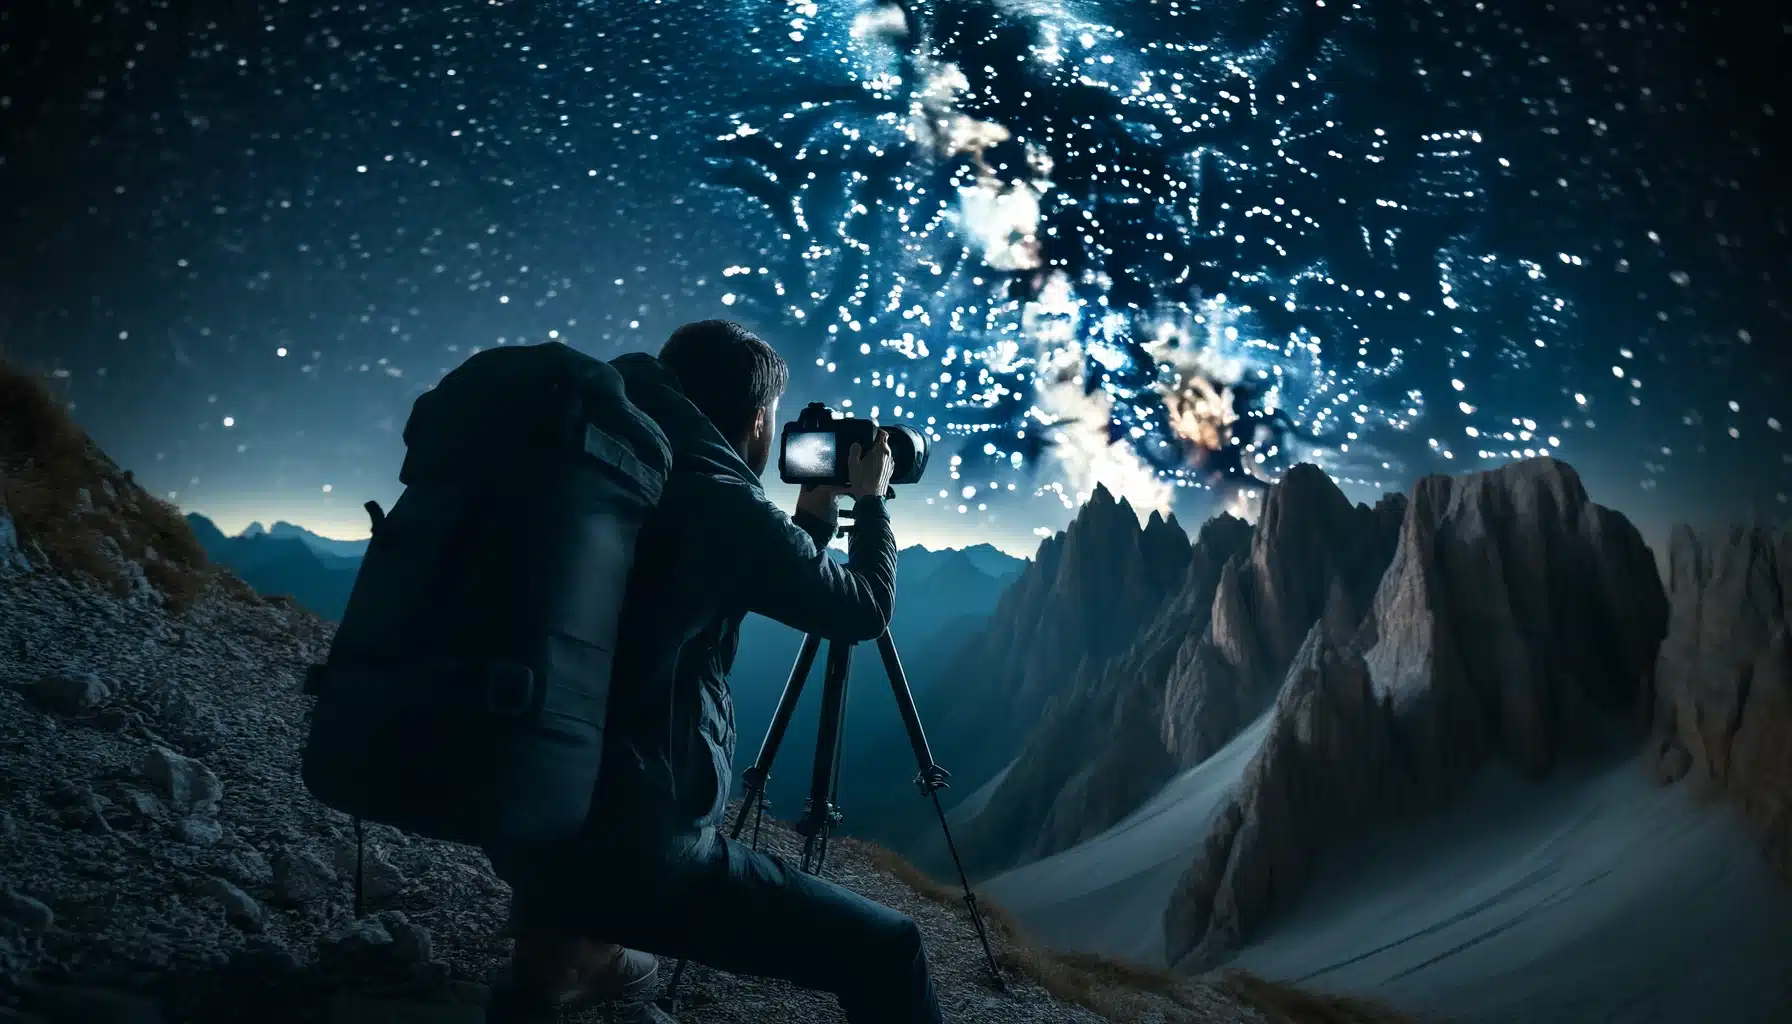 Photographer on a mountain at night using a tripod-mounted camera to capture the star-filled sky and Milky Way for Astrophotography, surrounded by rugged peaks.